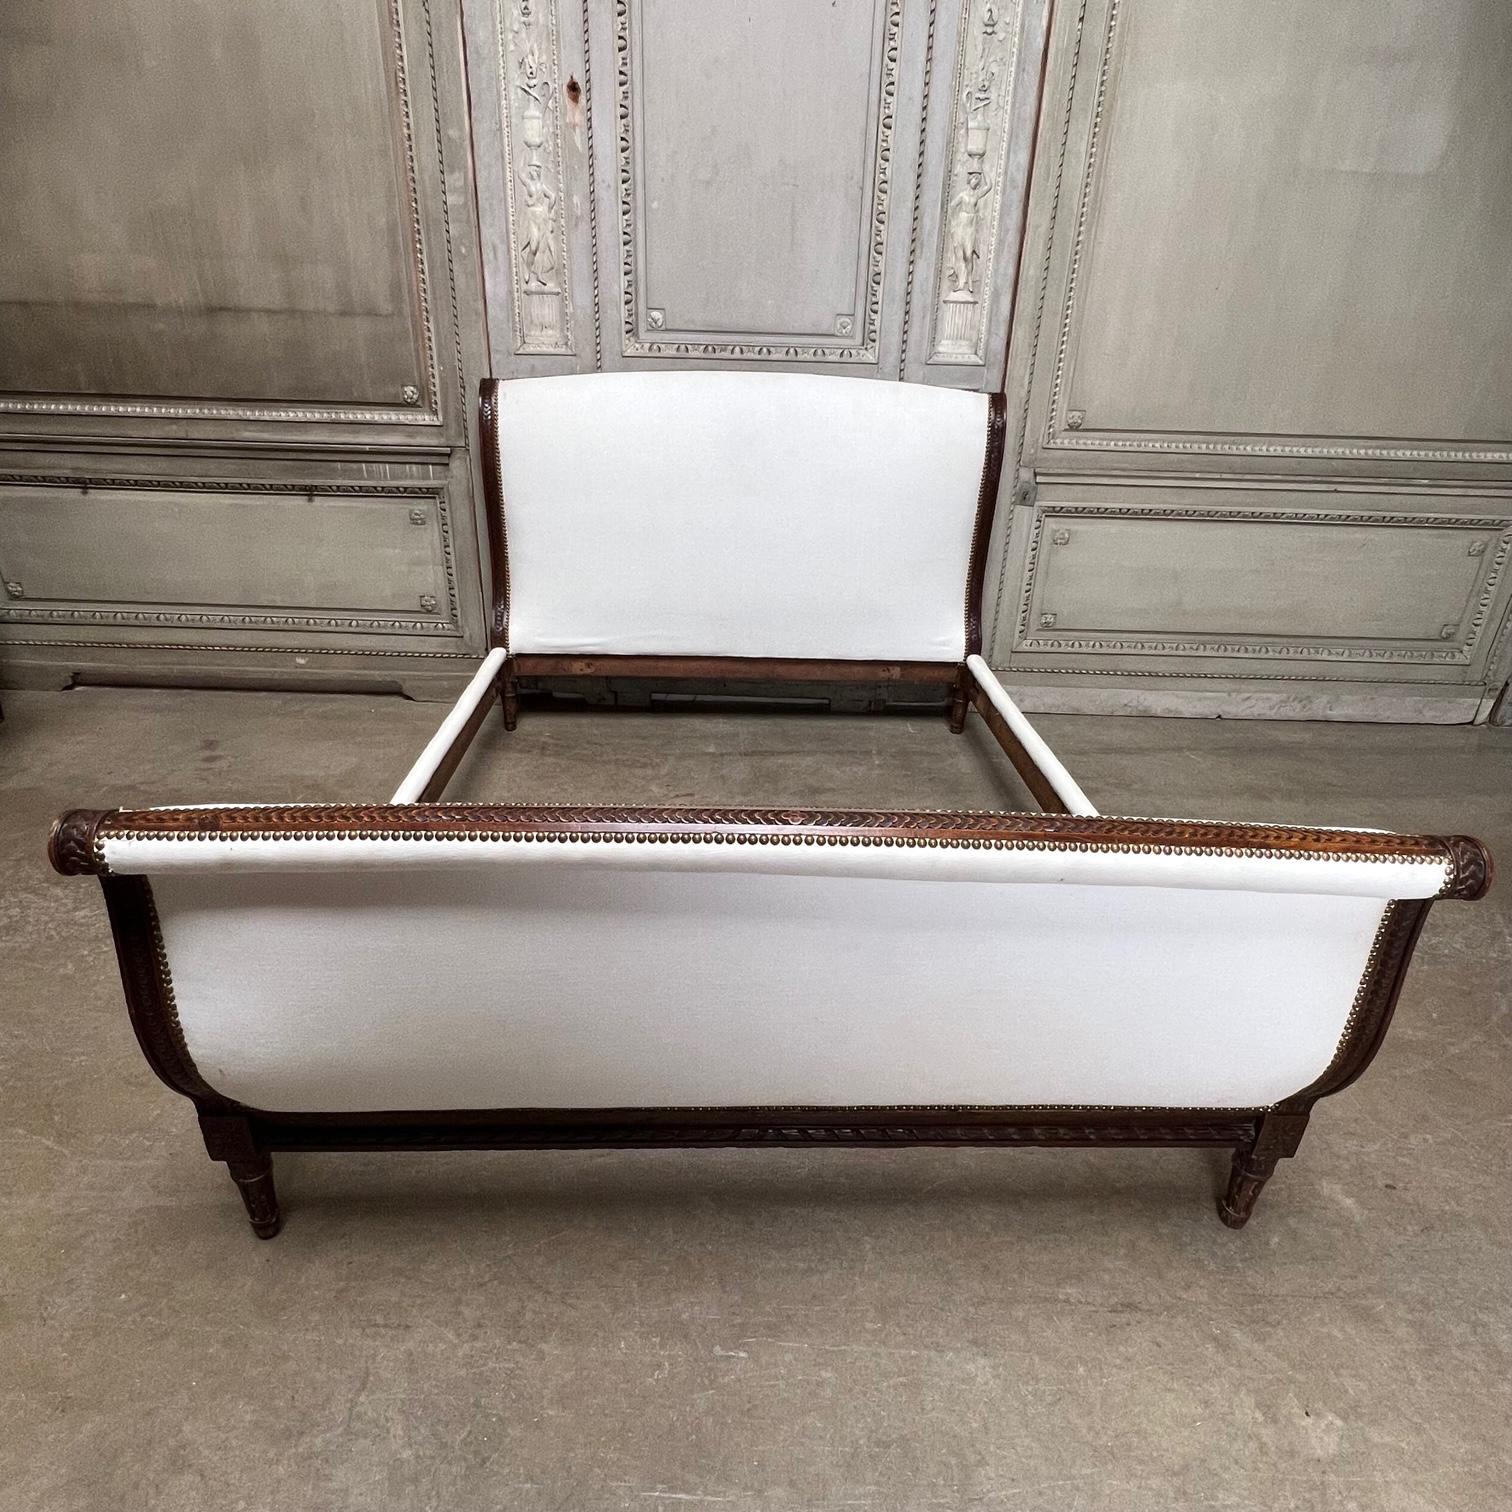 A French Louis XVI style bed in carved beechwood with a walnut finish is from the early 20th century. It is called a lit en bateau in French due to it shape, curving out on both the headboard and footboard. It is nicely carved with an over all fish